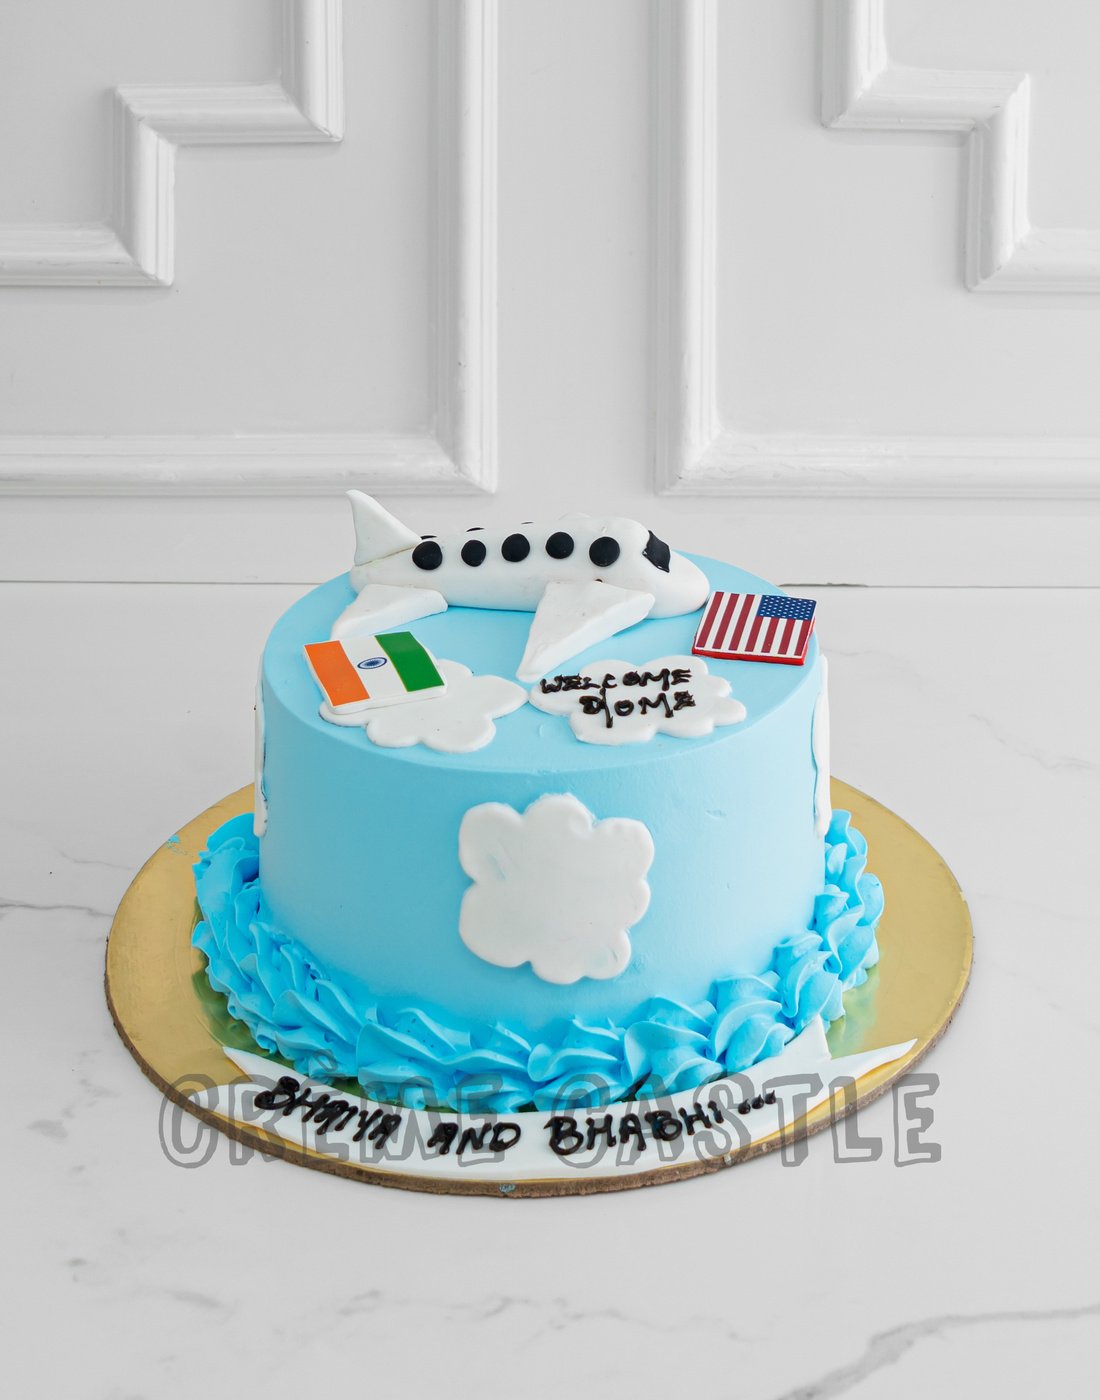 Online Cake Delivery in USA | Send Cakes Online - Giftalove